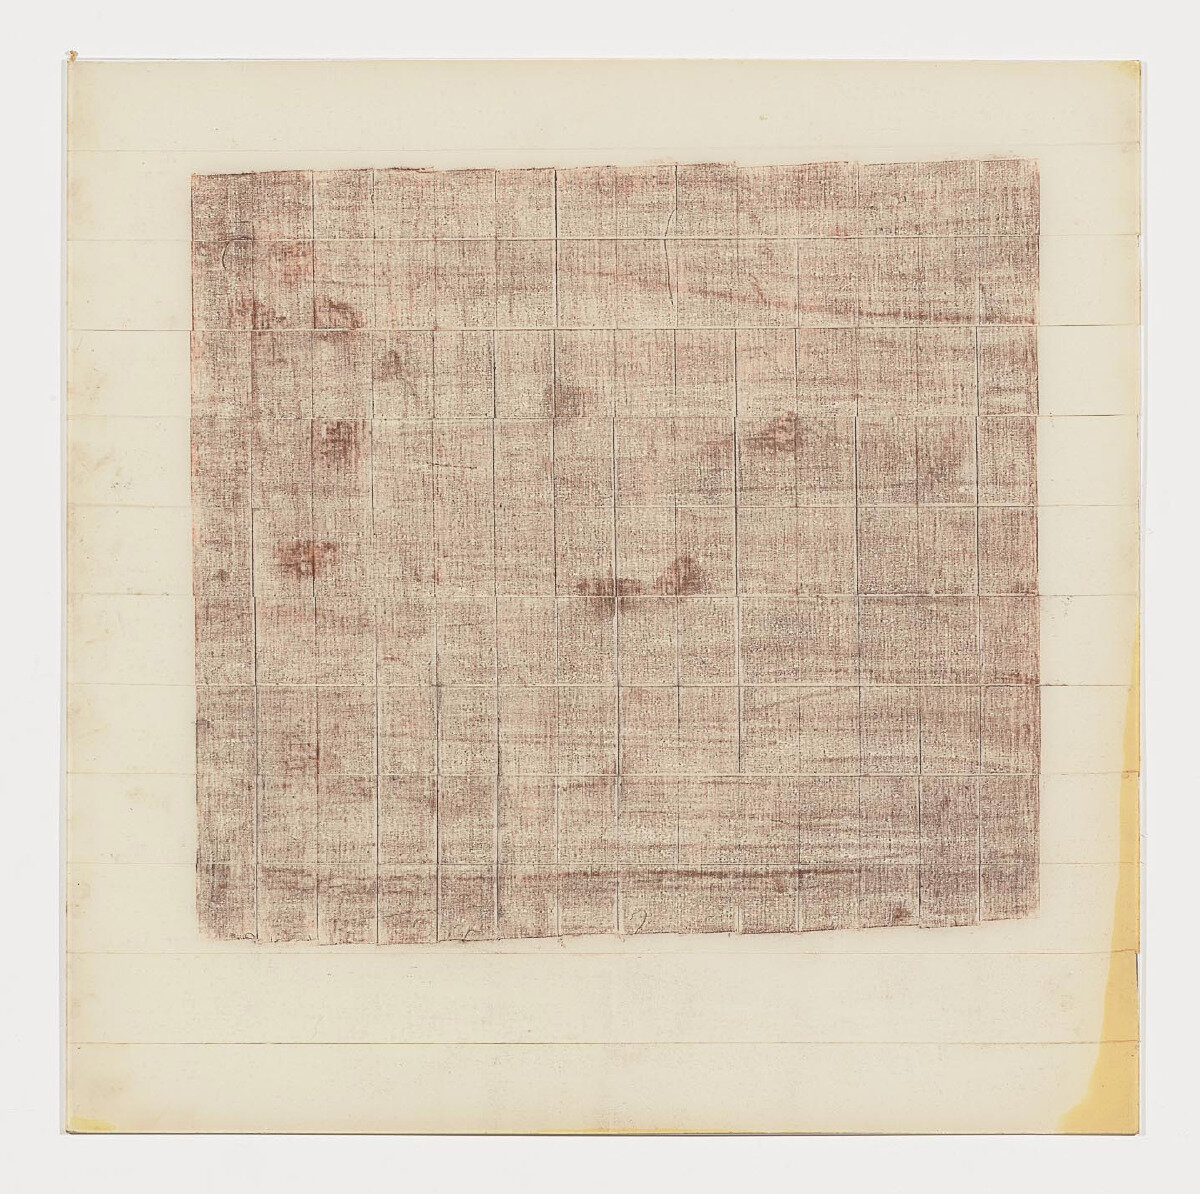  Untitled A, 1977, 36 x 36 inches, pastel and tape on Plexiglass 